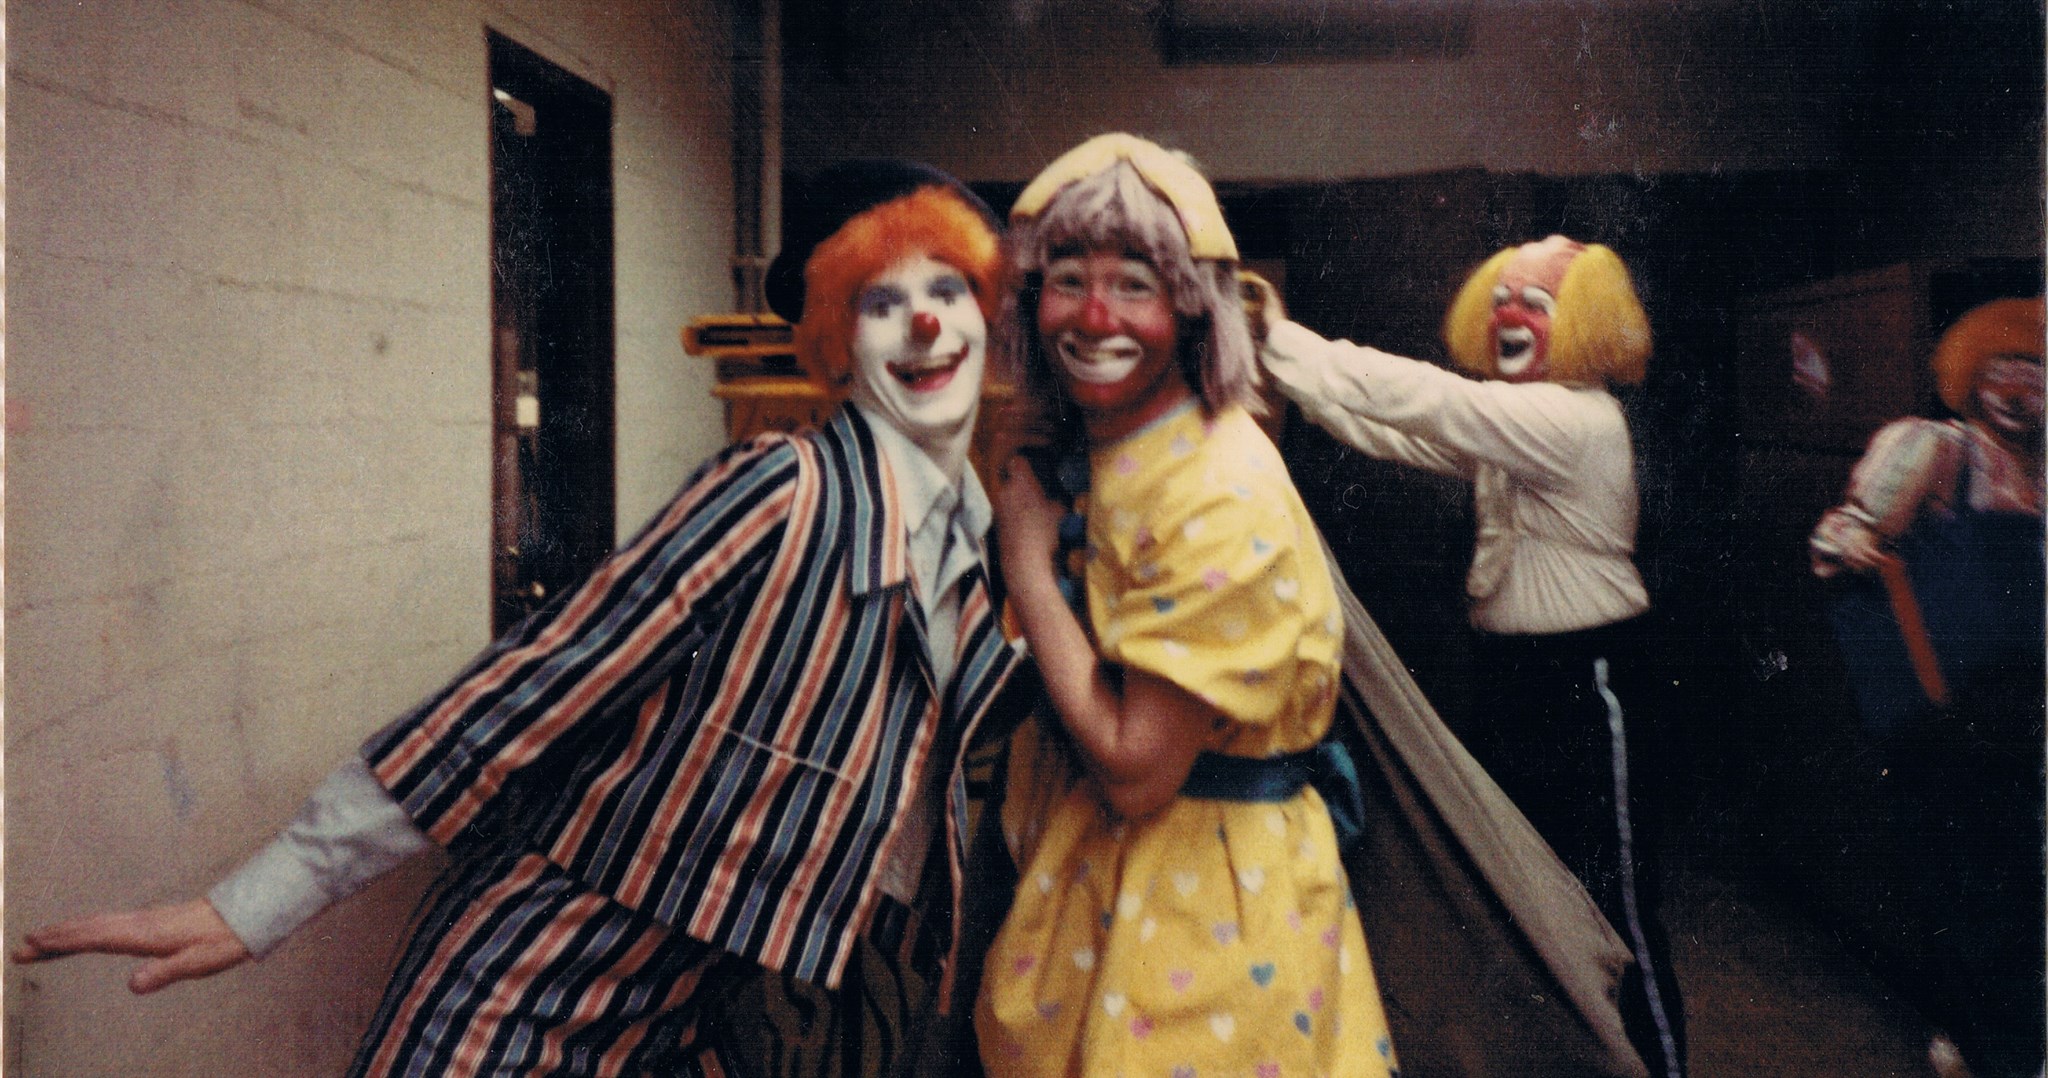 From left to right, Mike, John, and Karen are preparing for the Clown Gag in the center ring called School Daze. Yes, that's me in the middle, wearing a dress.